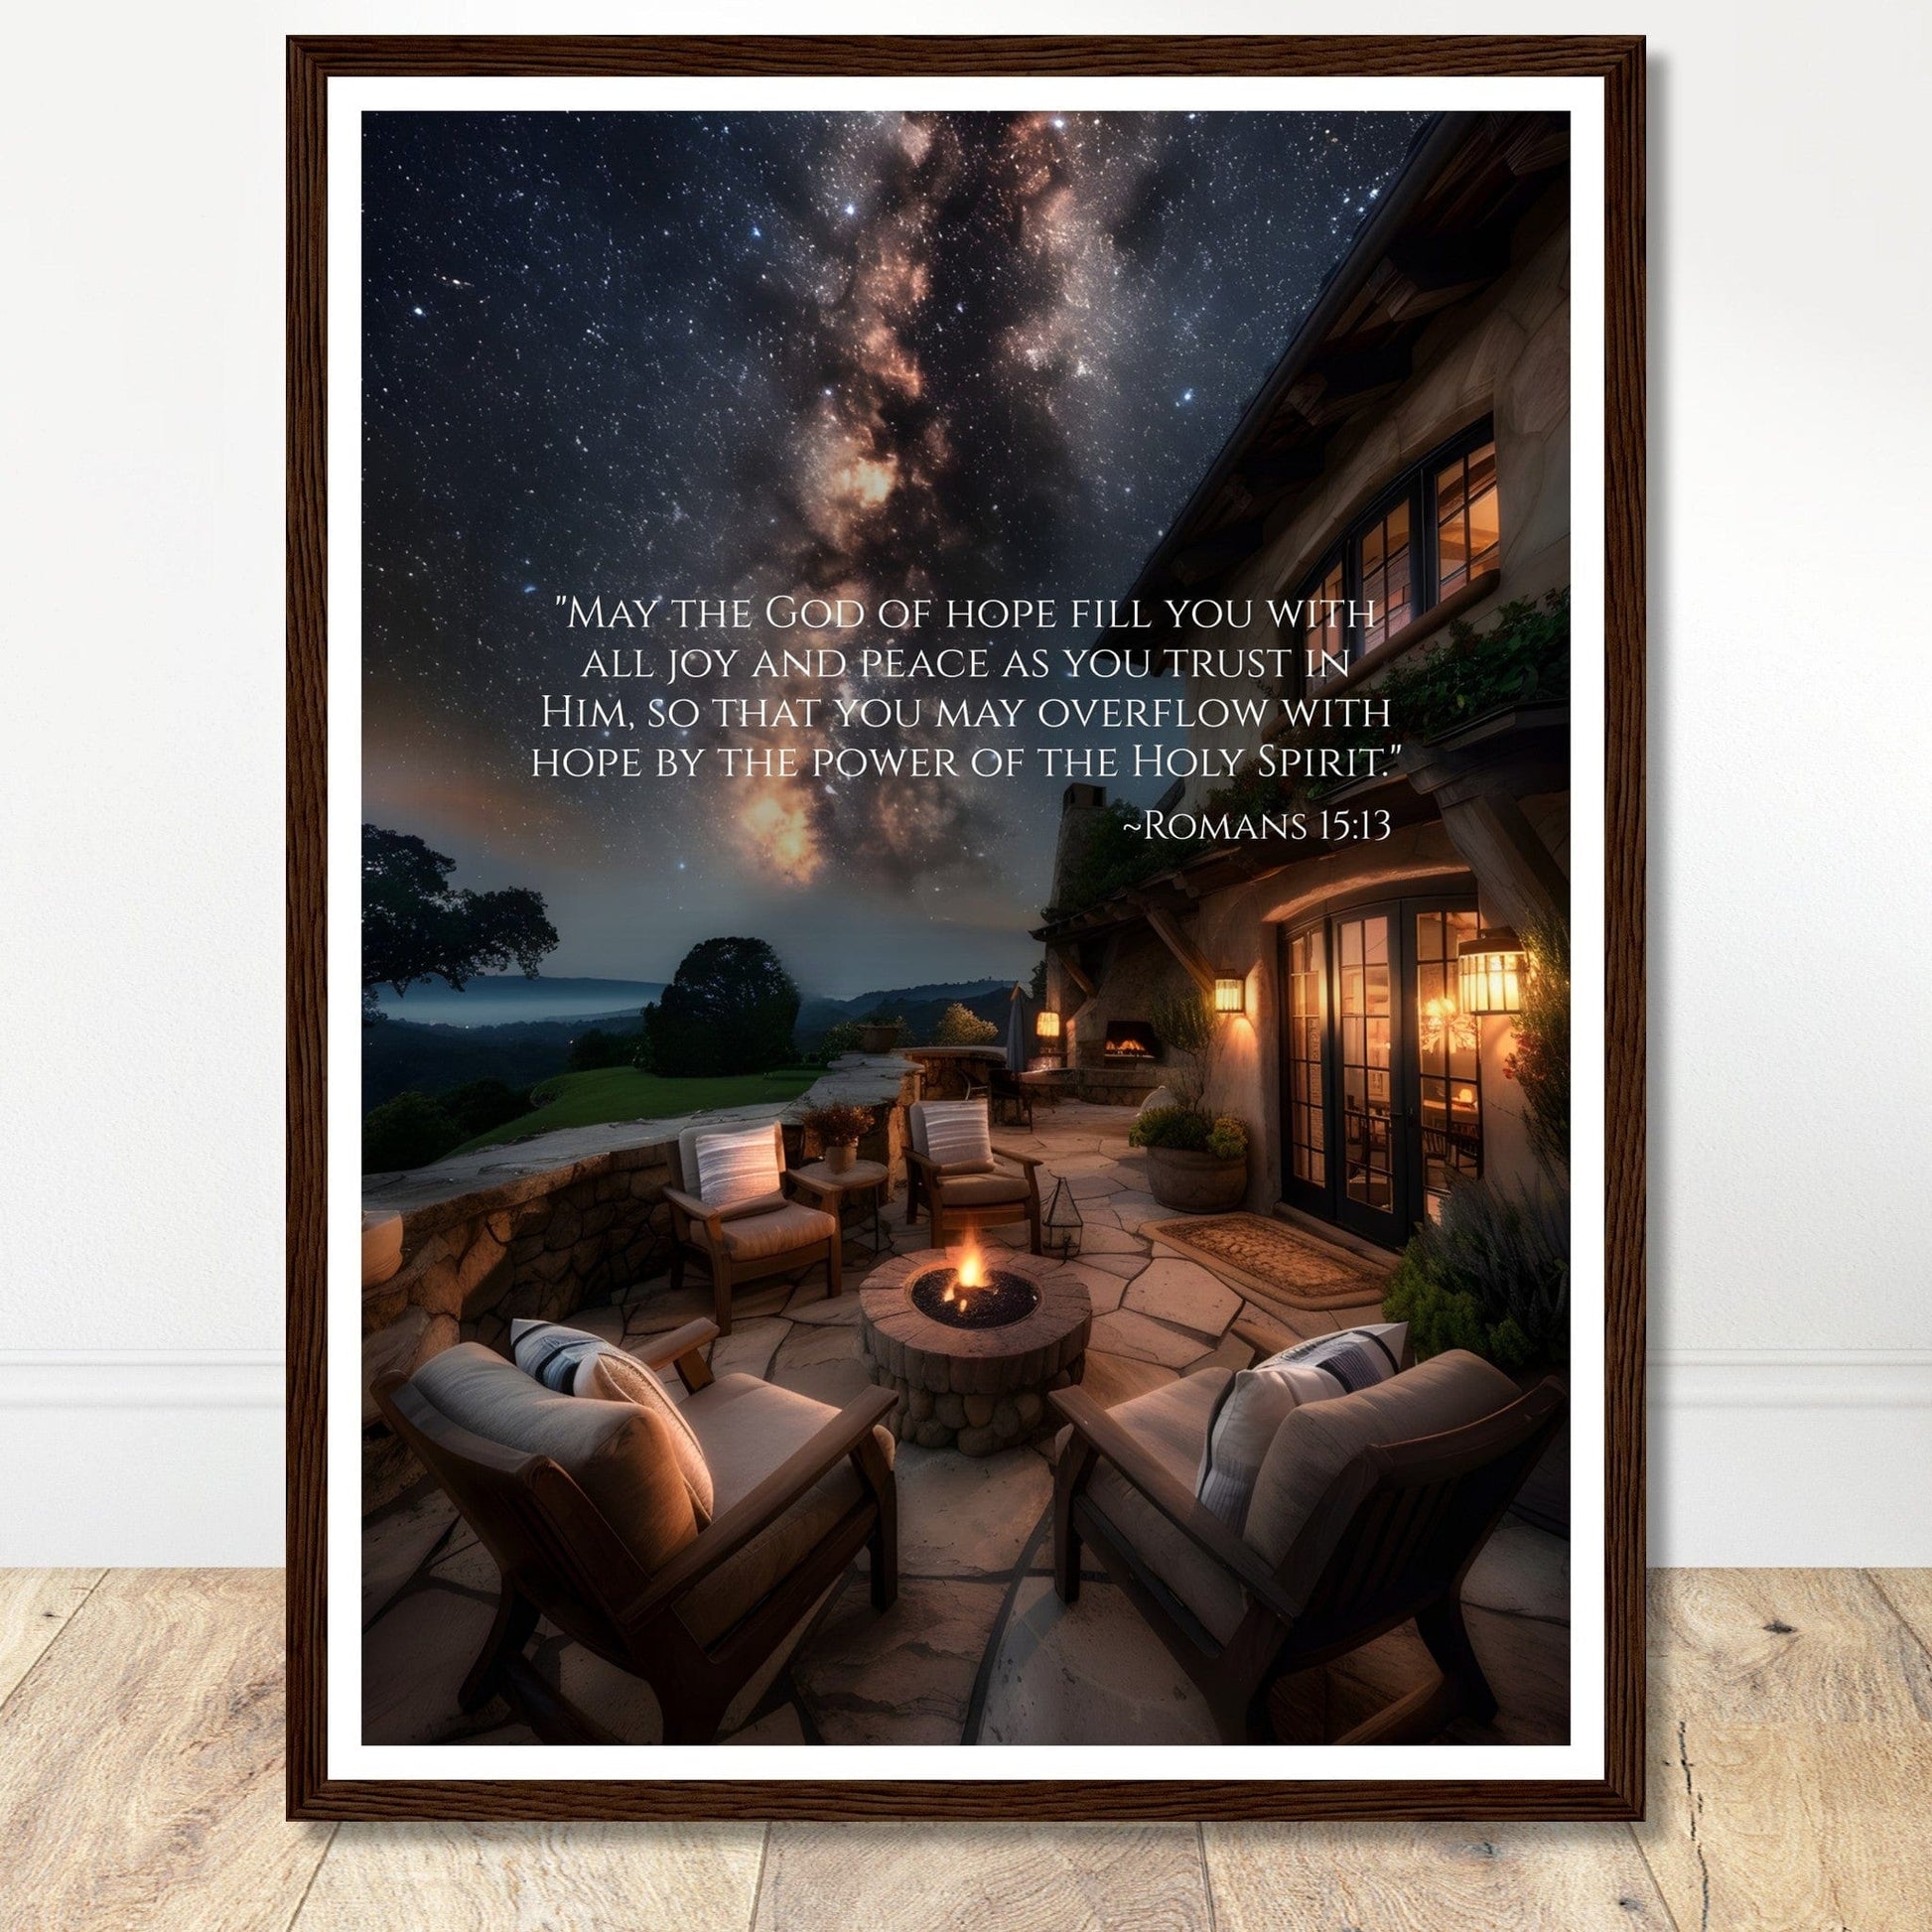 Coffee With My Father Print Material 45x60 cm / 18x24″ / Premium Matte Paper Wooden Framed Poster / Dark wood frame God of Hope